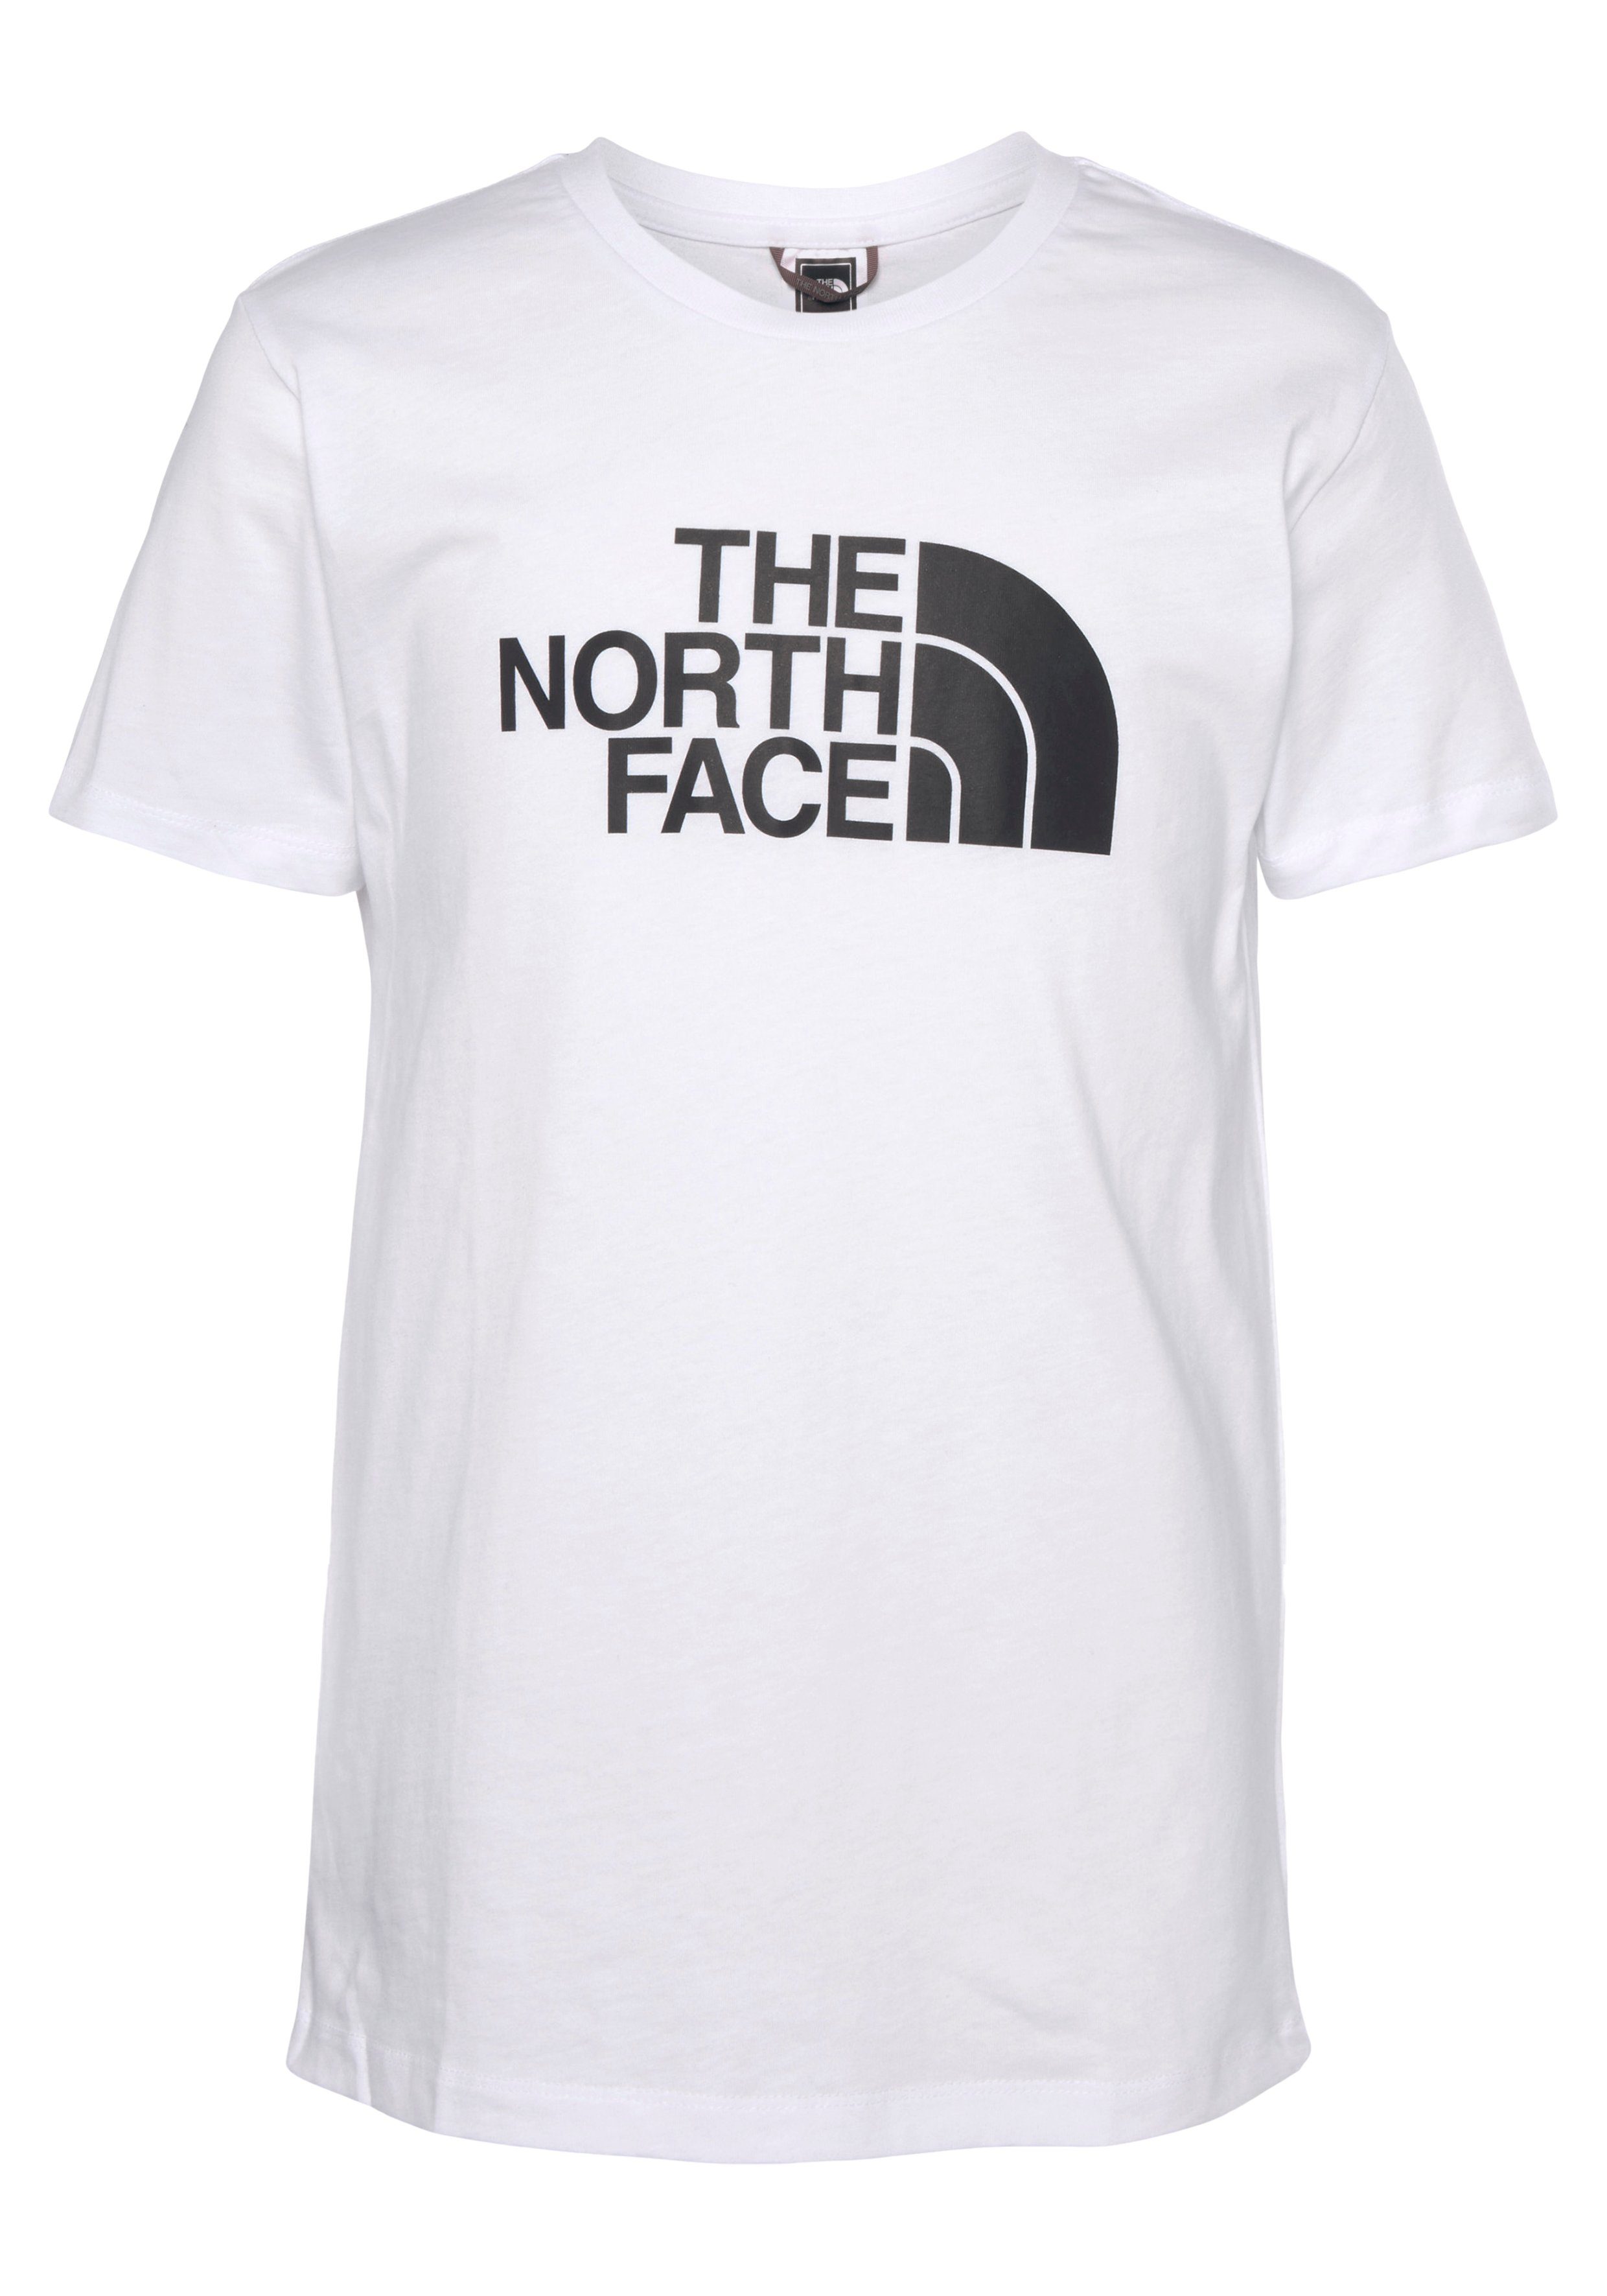 TEE North white für Kinder The EASY Face T-Shirt -